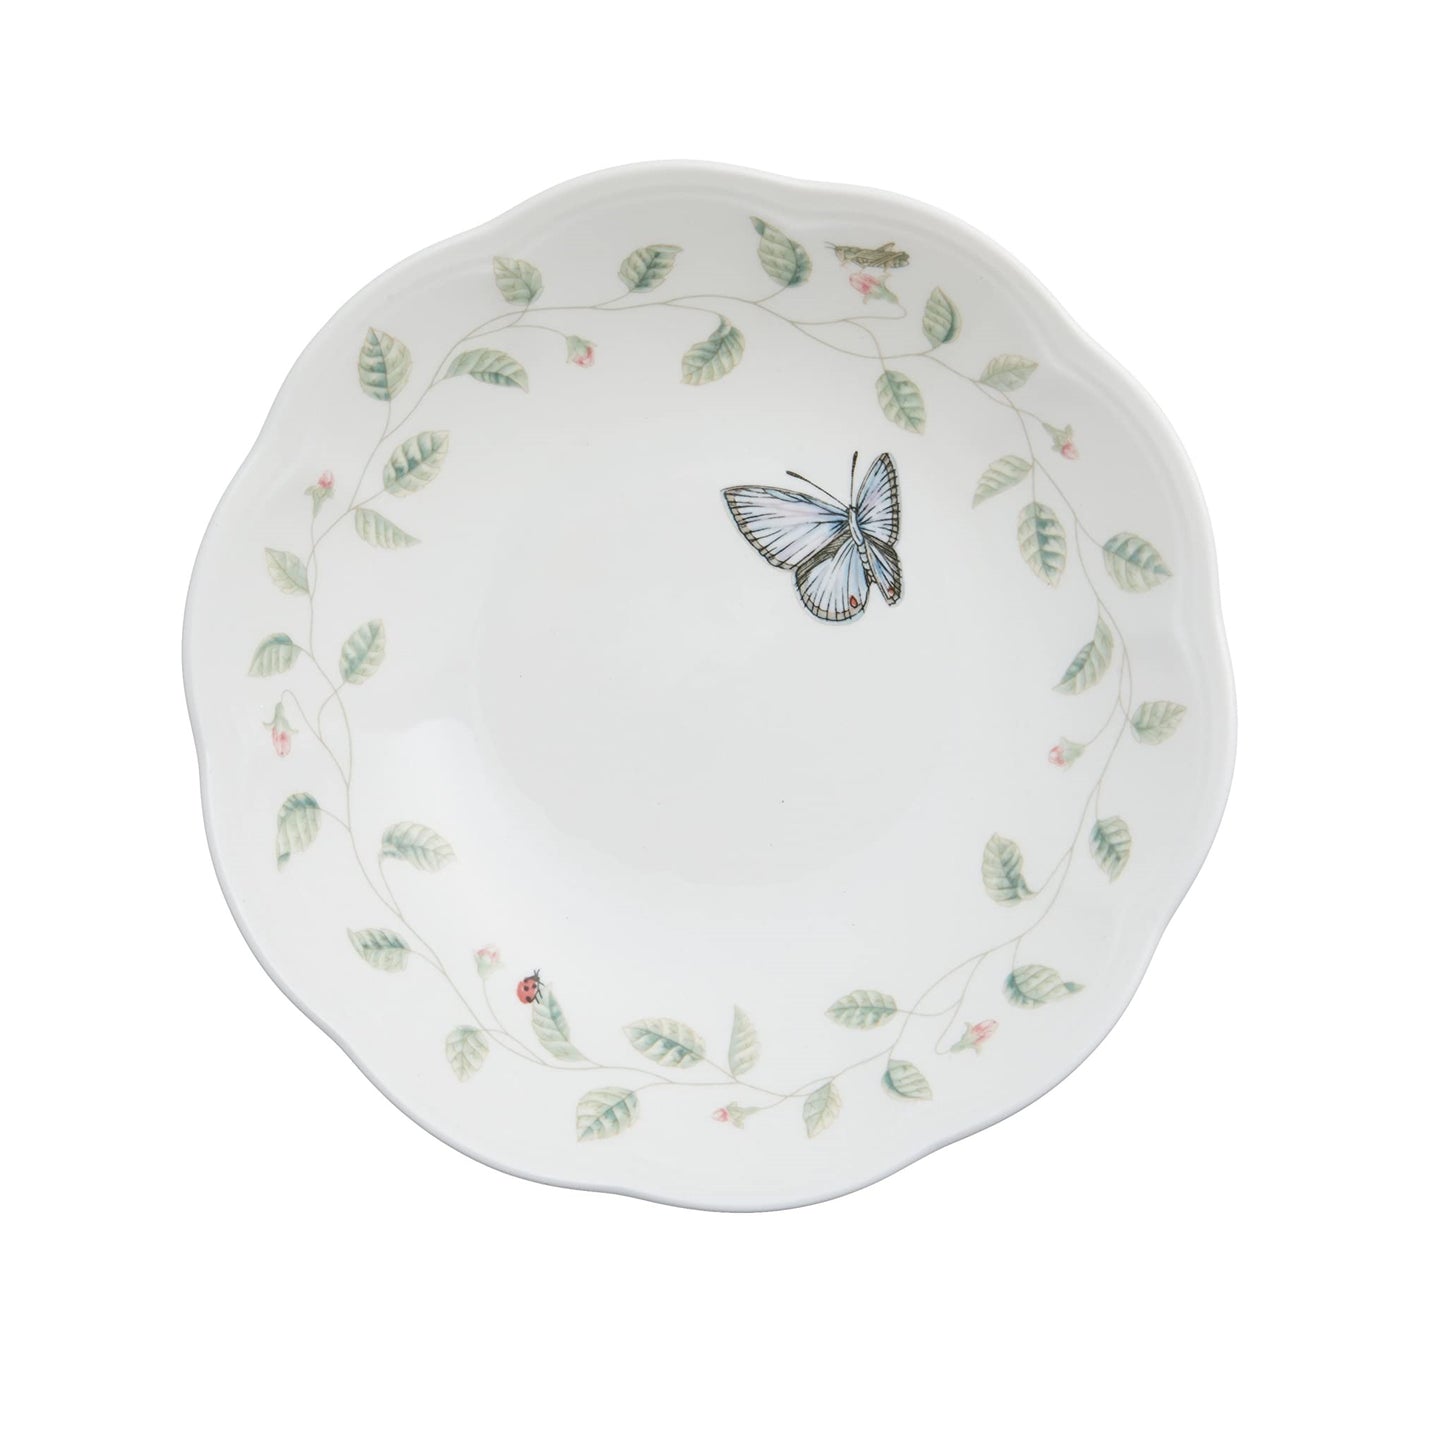 Butterfly Meadow 7-Piece Pasta and Salad Bowl Set by Lenox